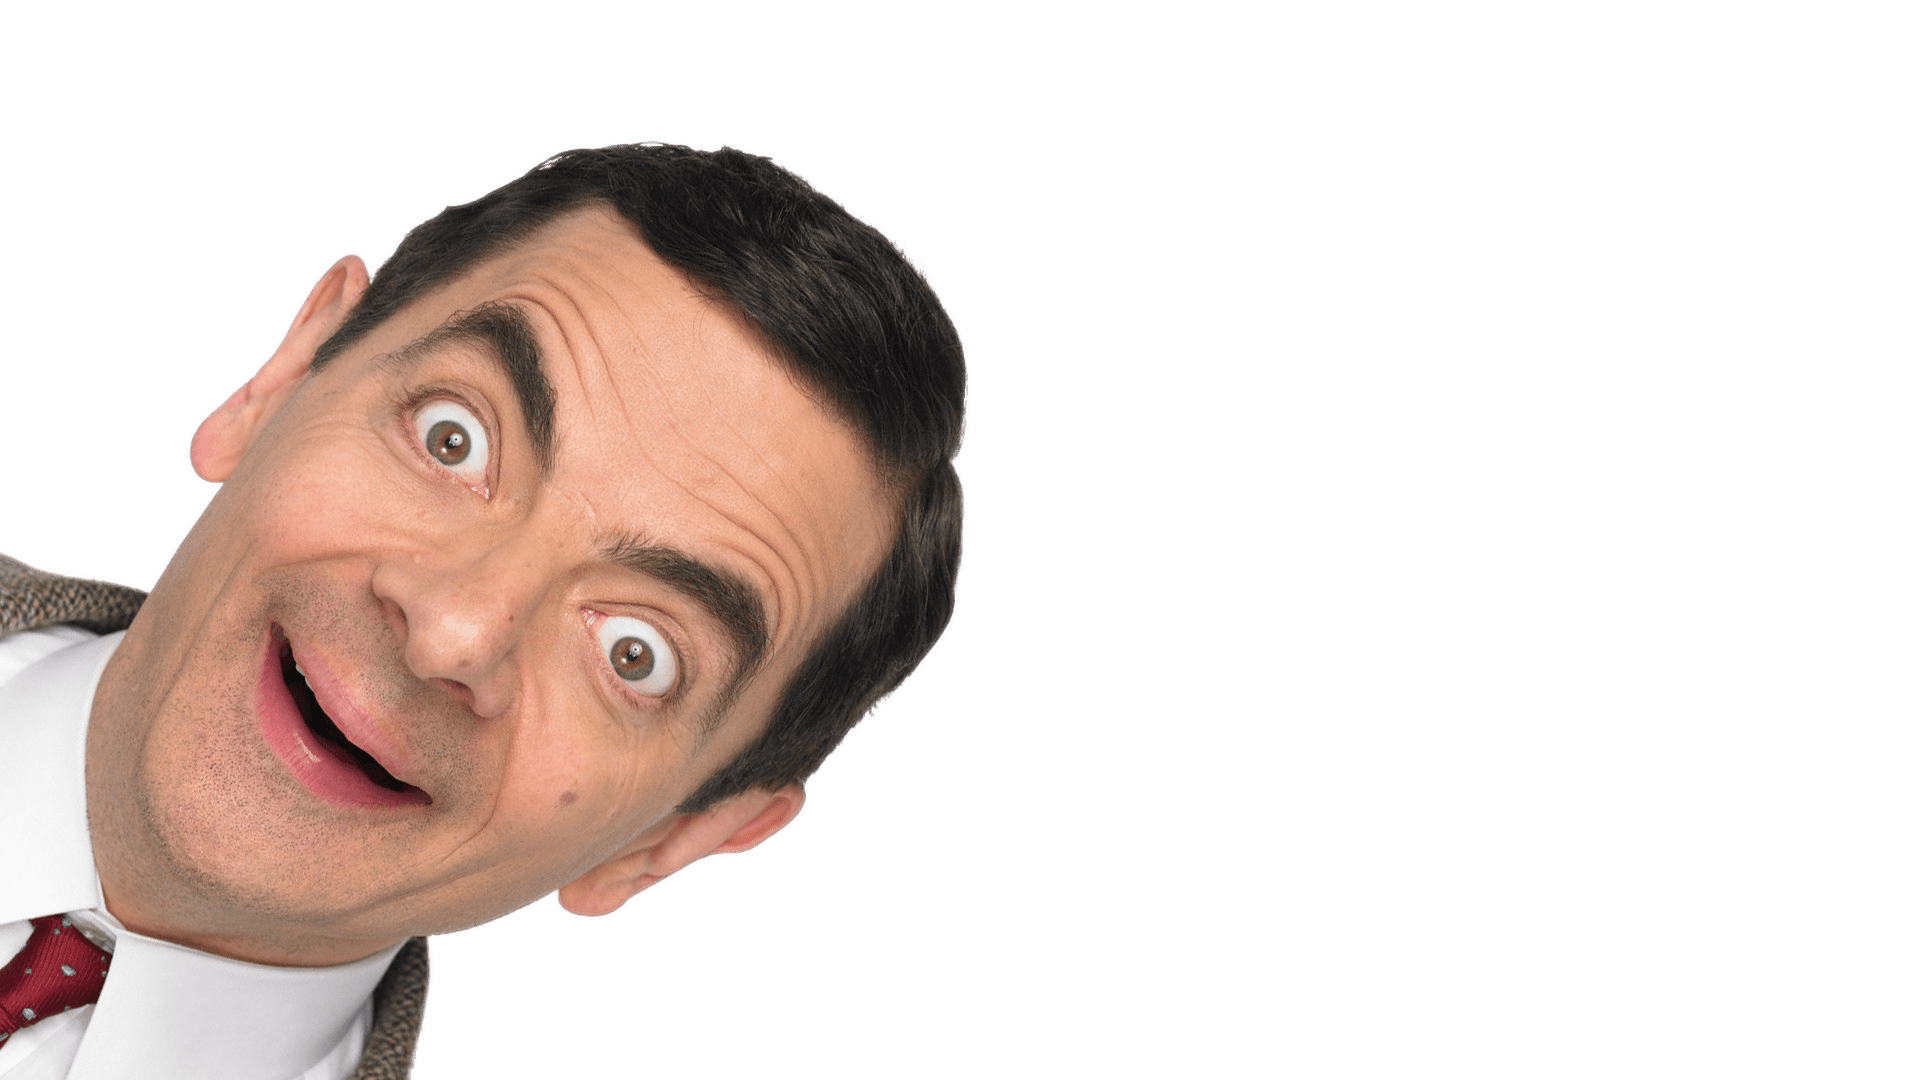 Nose PNG HD